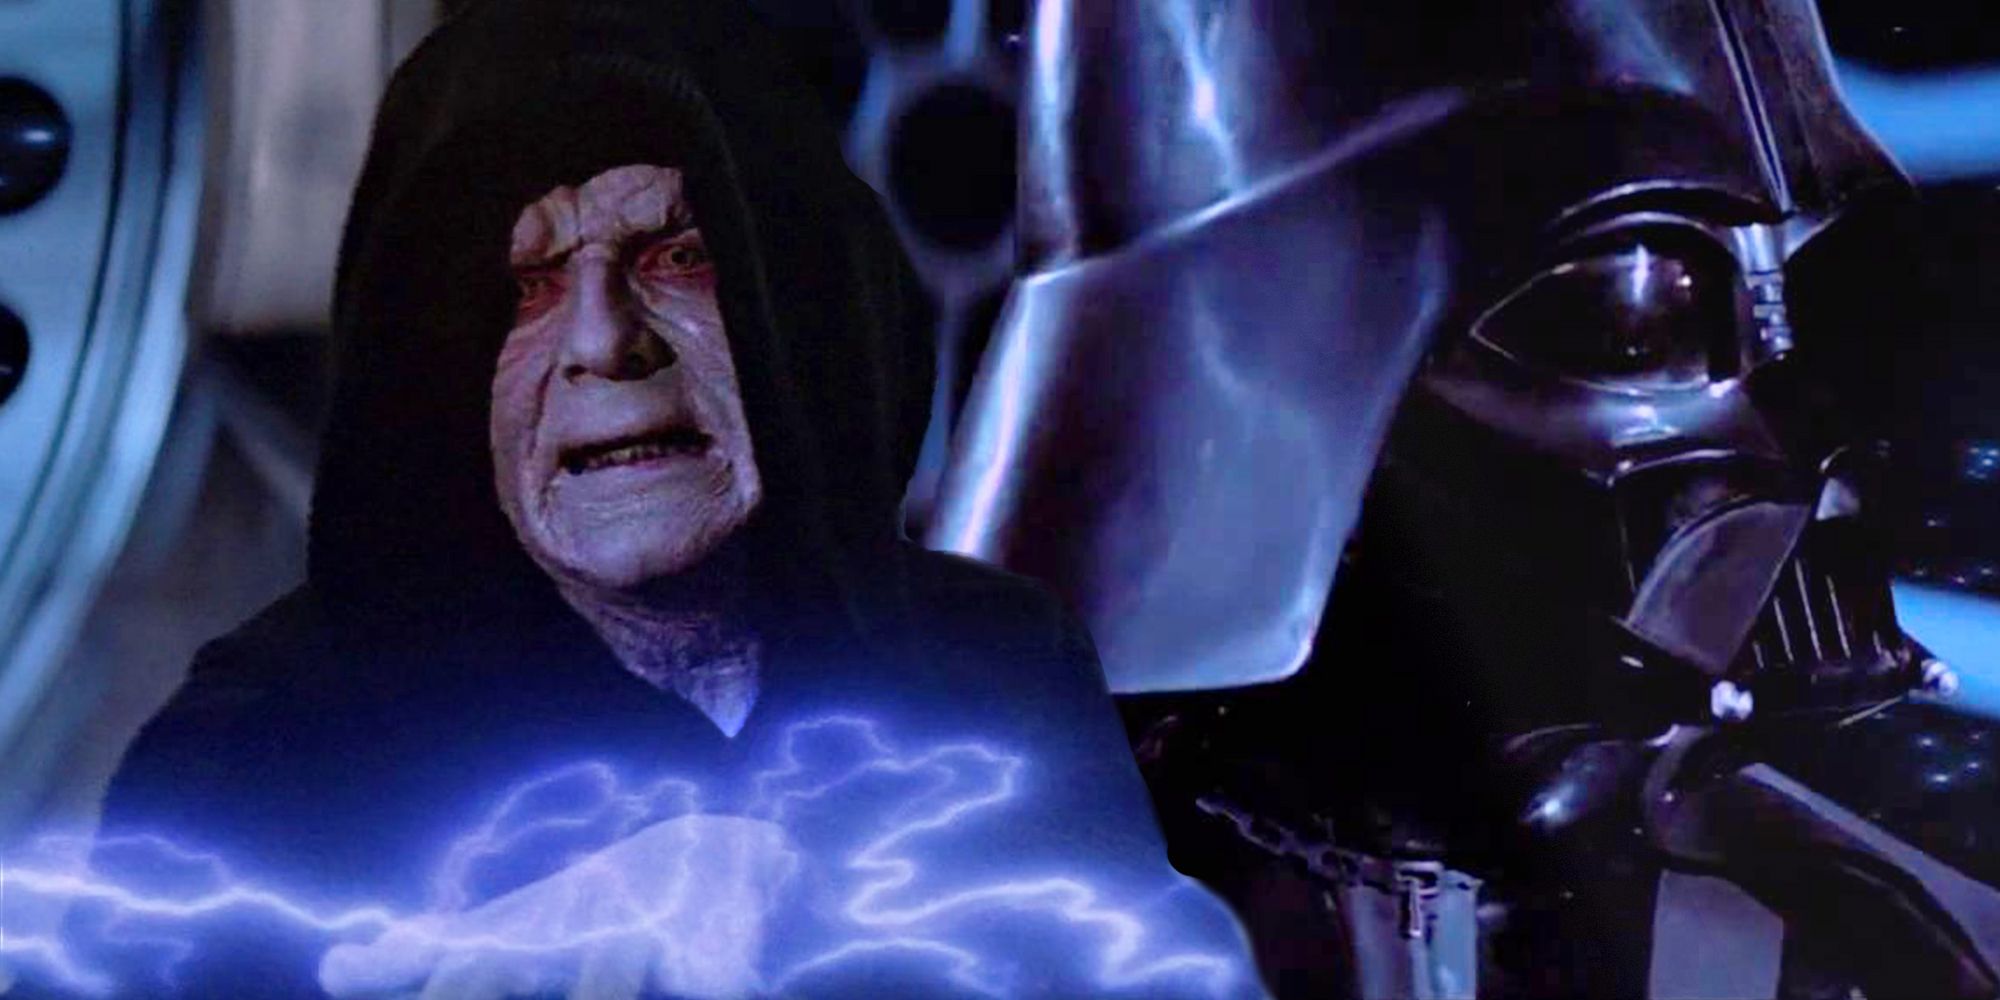 Darth Vader and Palpatine from Return of the Jedi facing away from each other.